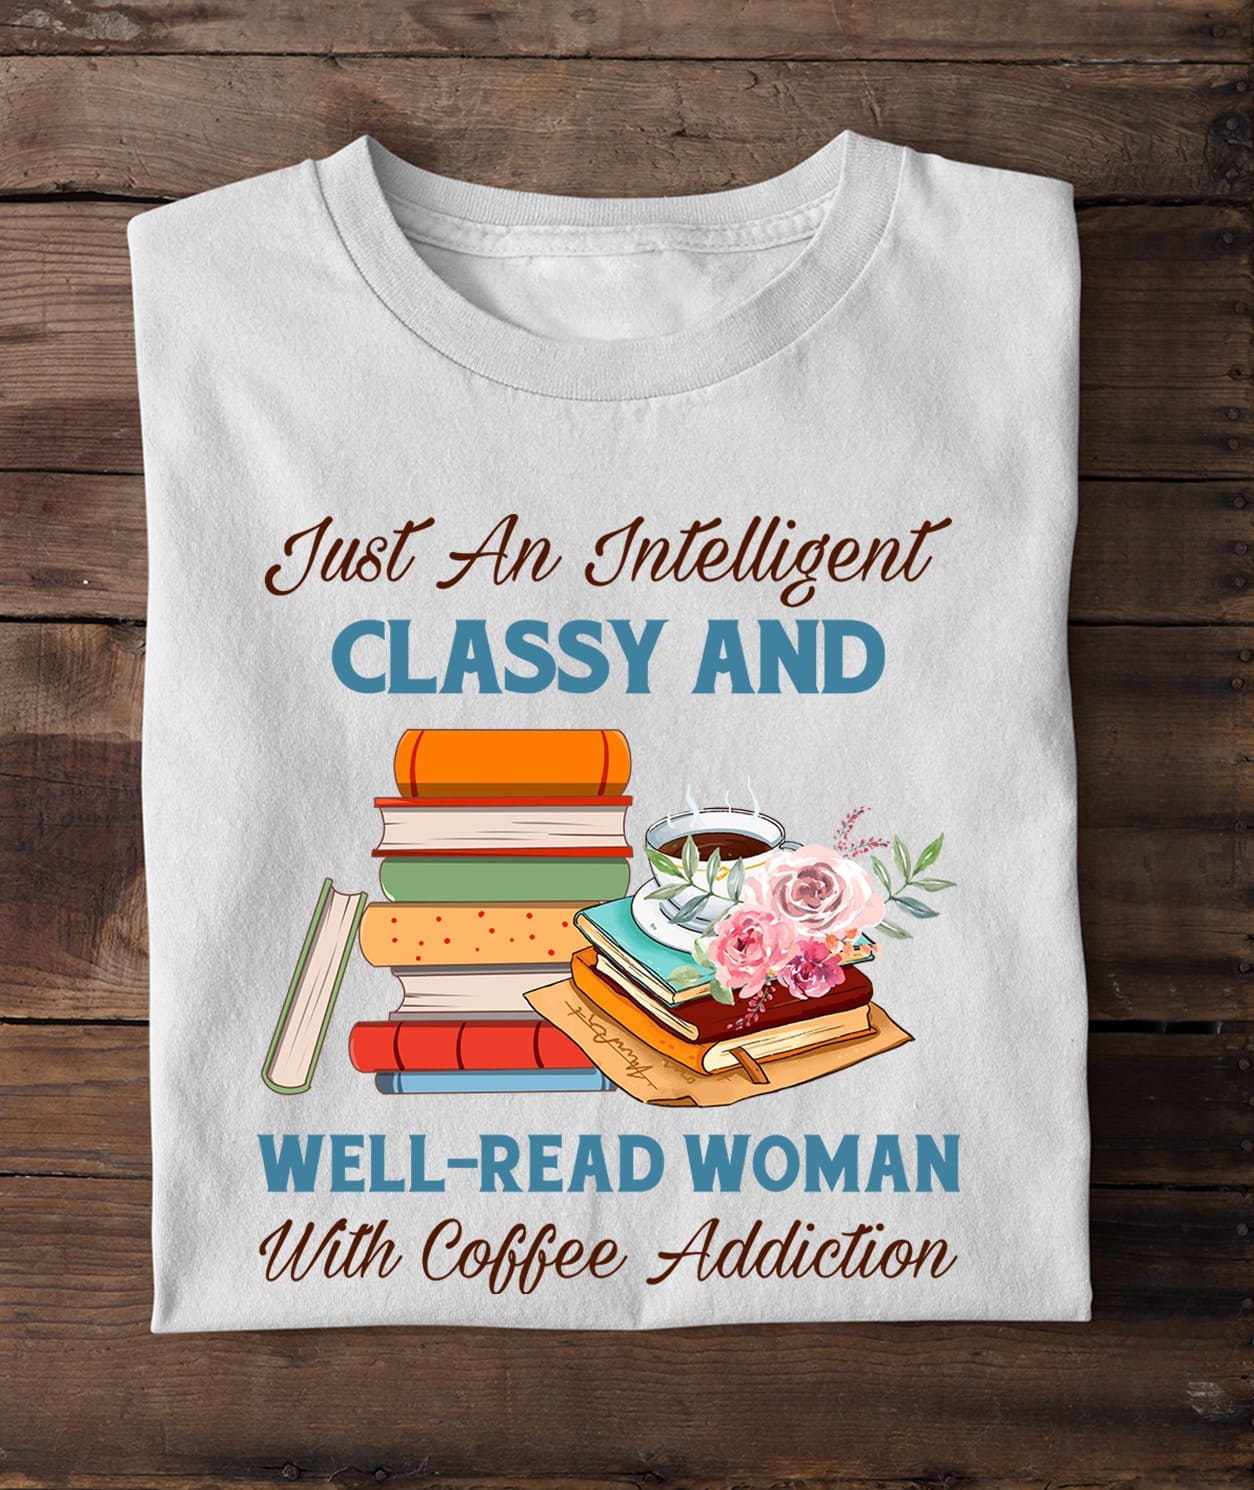 Just an intelligent classy and well-read woman with coffee addiction - Coffee and book, woman loves reading